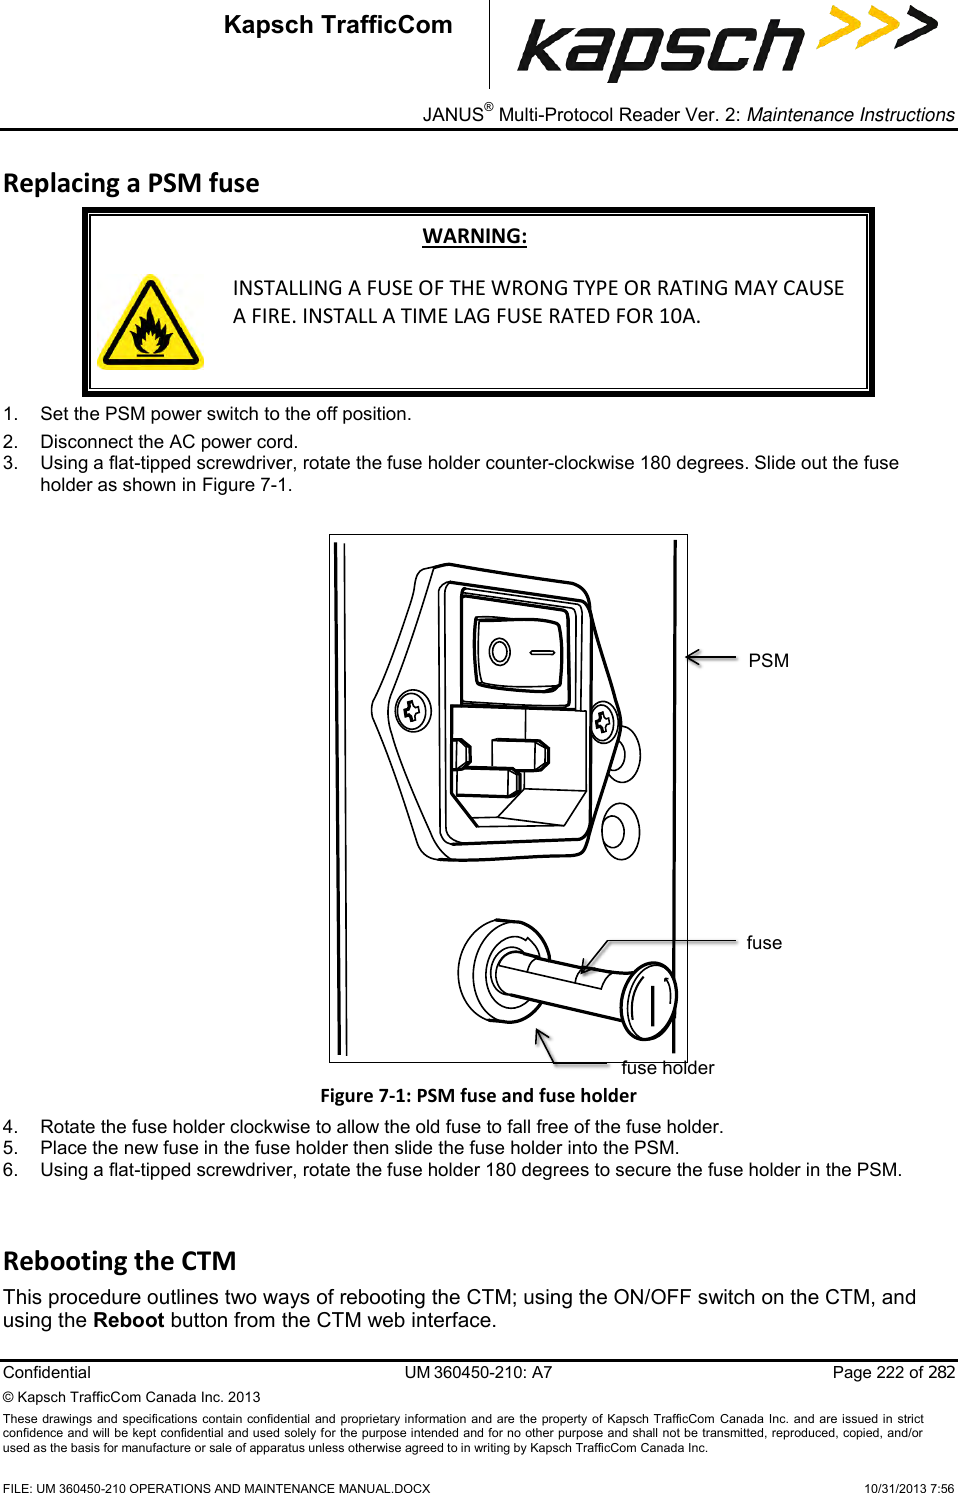 _ JANUS® Multi-Protocol Reader Ver. 2: Maintenance Instructions   Confidential  UM 360450-210: A7  Page 222 of 282 © Kapsch TrafficCom Canada Inc. 2013 These  drawings and specifications contain confidential  and  proprietary information and are  the  property of Kapsch TrafficCom  Canada Inc.  and are issued in strict confidence and will be kept confidential and used solely for the purpose intended and for no other purpose and shall not be transmitted, reproduced, copied, and/or used as the basis for manufacture or sale of apparatus unless otherwise agreed to in writing by Kapsch TrafficCom Canada Inc.    FILE: UM 360450-210 OPERATIONS AND MAINTENANCE MANUAL.DOCX    10/31/2013 7:56 Kapsch TrafficCom Replacing a PSM fuse WARNING:  INSTALLING A FUSE OF THE WRONG TYPE OR RATING MAY CAUSE A FIRE. INSTALL A TIME LAG FUSE RATED FOR 10A. 1.  Set the PSM power switch to the off position. 2.  Disconnect the AC power cord. 3.  Using a flat-tipped screwdriver, rotate the fuse holder counter-clockwise 180 degrees. Slide out the fuse holder as shown in Figure 7-1. Figure 7-1: PSM fuse and fuse holder 4.  Rotate the fuse holder clockwise to allow the old fuse to fall free of the fuse holder.  5.  Place the new fuse in the fuse holder then slide the fuse holder into the PSM.  6.  Using a flat-tipped screwdriver, rotate the fuse holder 180 degrees to secure the fuse holder in the PSM. Rebooting the CTM This procedure outlines two ways of rebooting the CTM; using the ON/OFF switch on the CTM, and using the Reboot button from the CTM web interface. PSM fuse holder fuse 